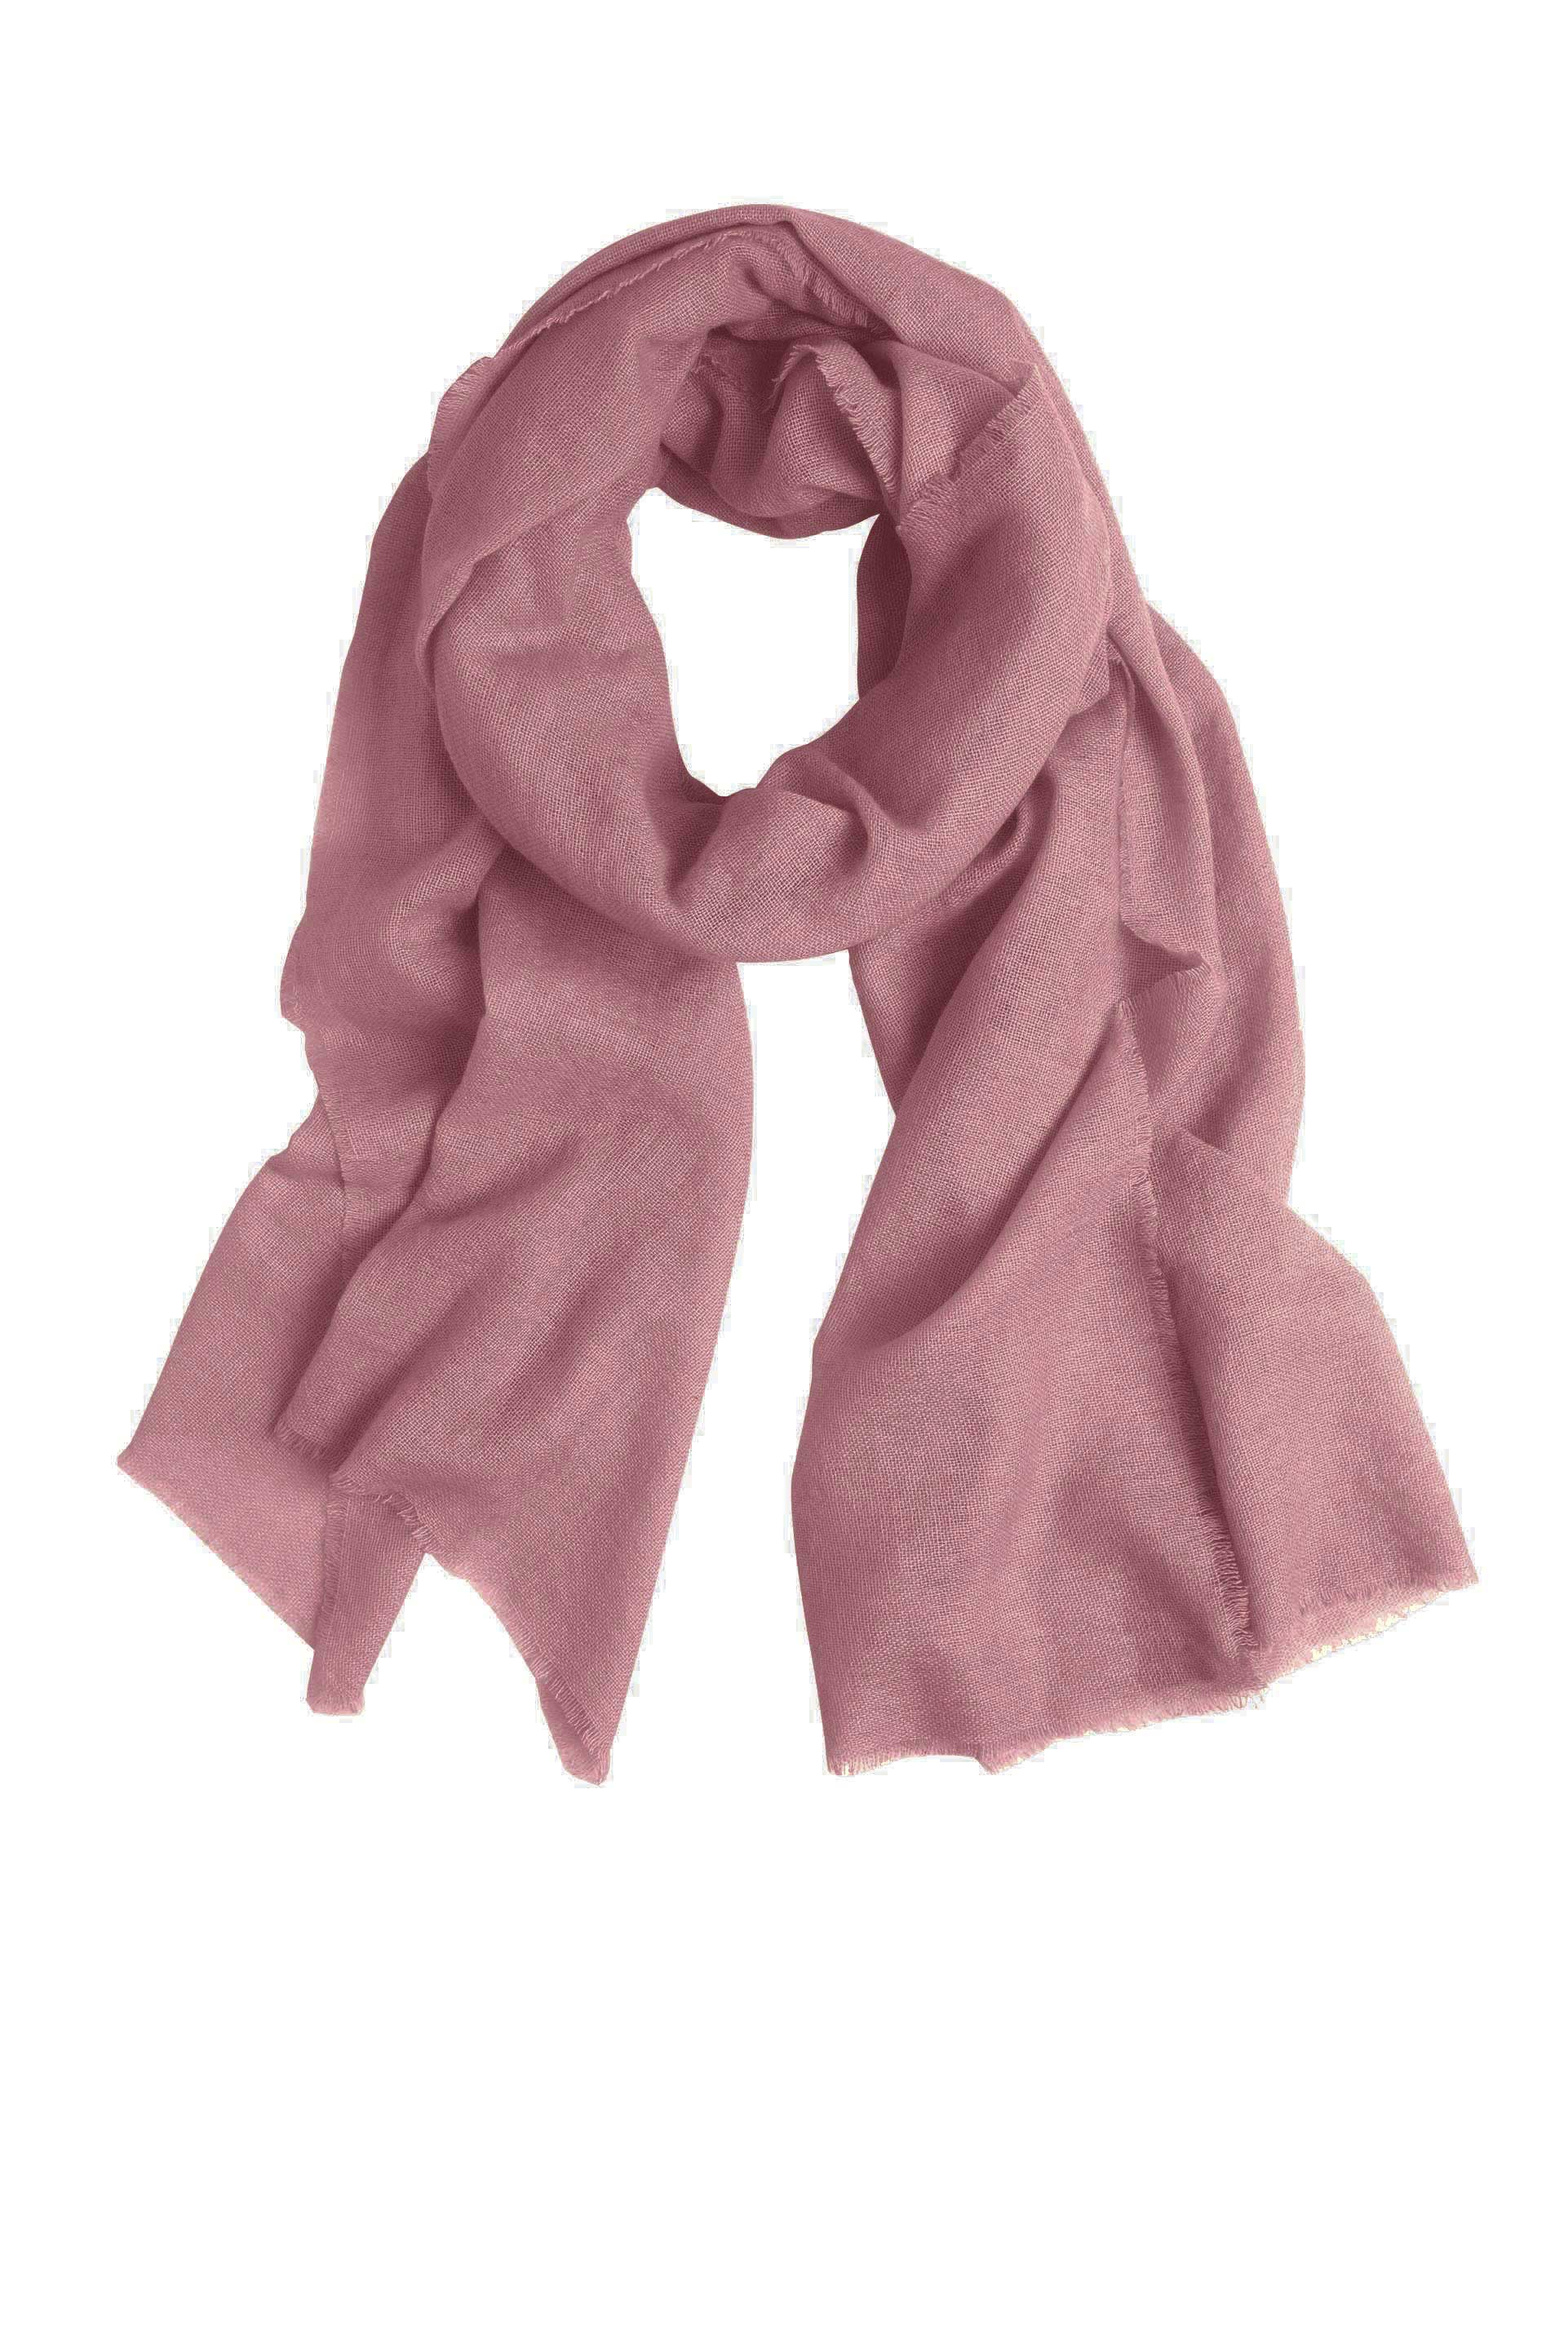 53028_cashmere_gauze_stole_rose_taupe_cs3_for_shop_the_look.jpg